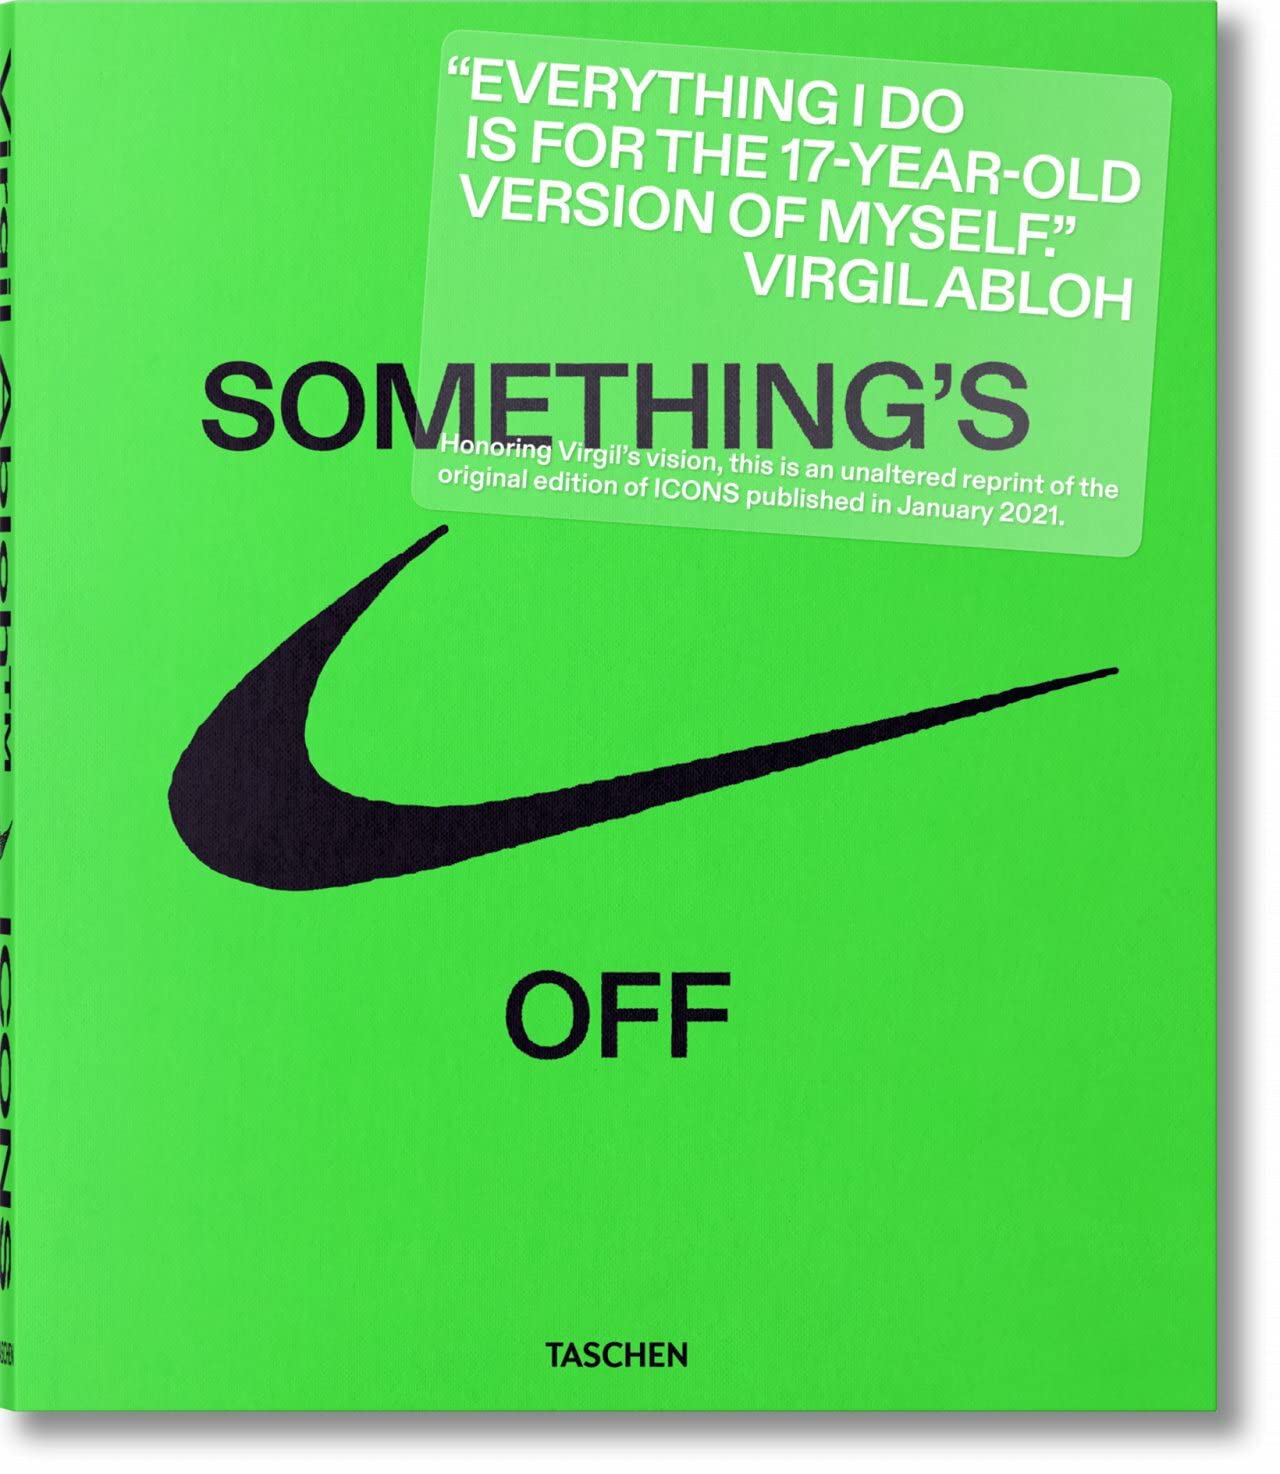 THE MEMOIR OF VIRGIL ABLOH: THE ENTIRE STORY OF A TALENTED